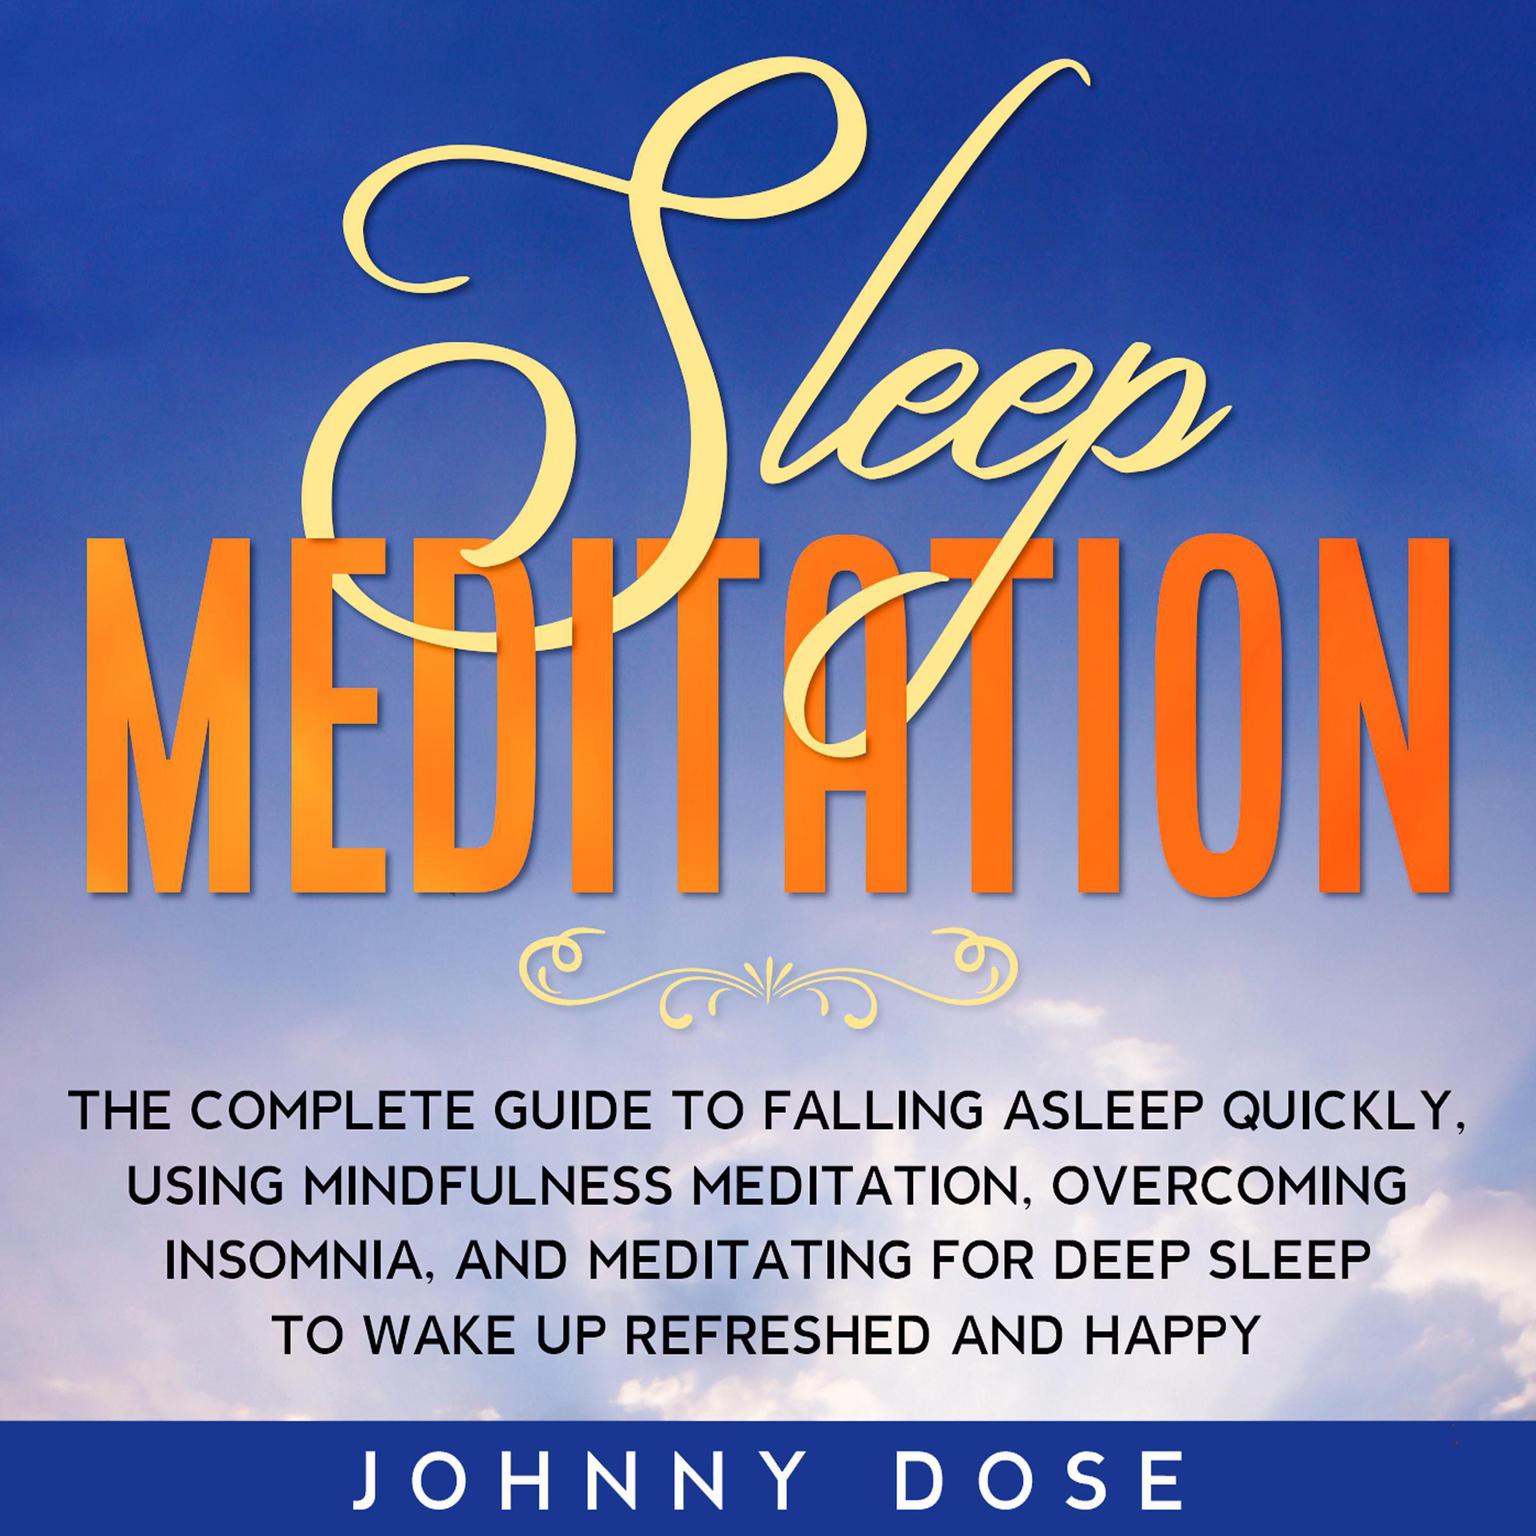 Sleep Meditation: The Complete Guide to Falling Asleep Quickly, Using Mindfulness Meditation, Overcoming Insomnia, and Meditating for Deep Sleep to Wake up Refreshed and Happy Audiobook, by Johnny Dose